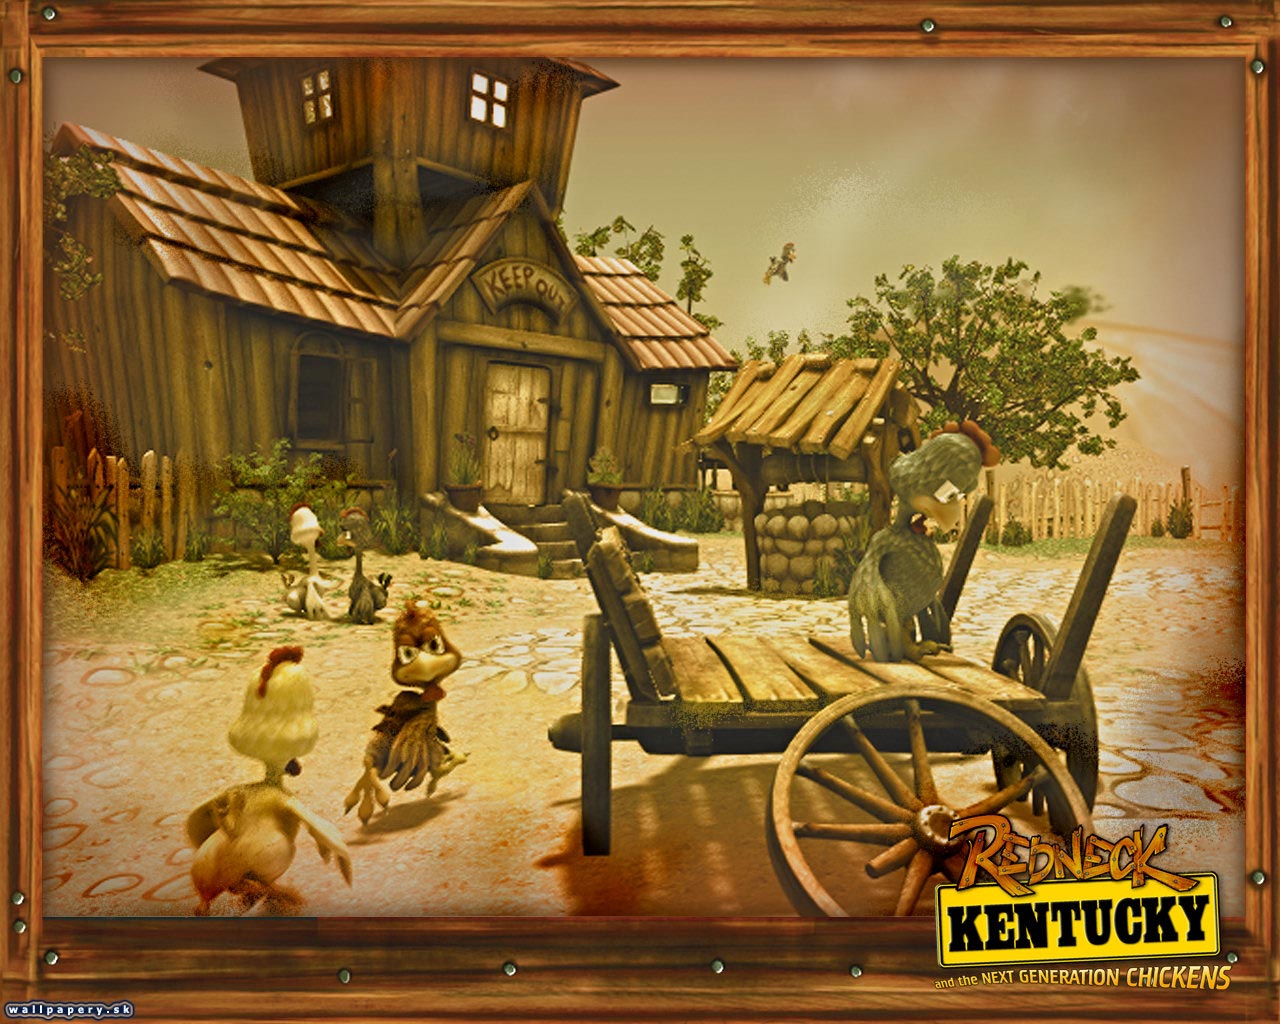 Redneck Kentucky and the Next Generation Chickens - wallpaper 5